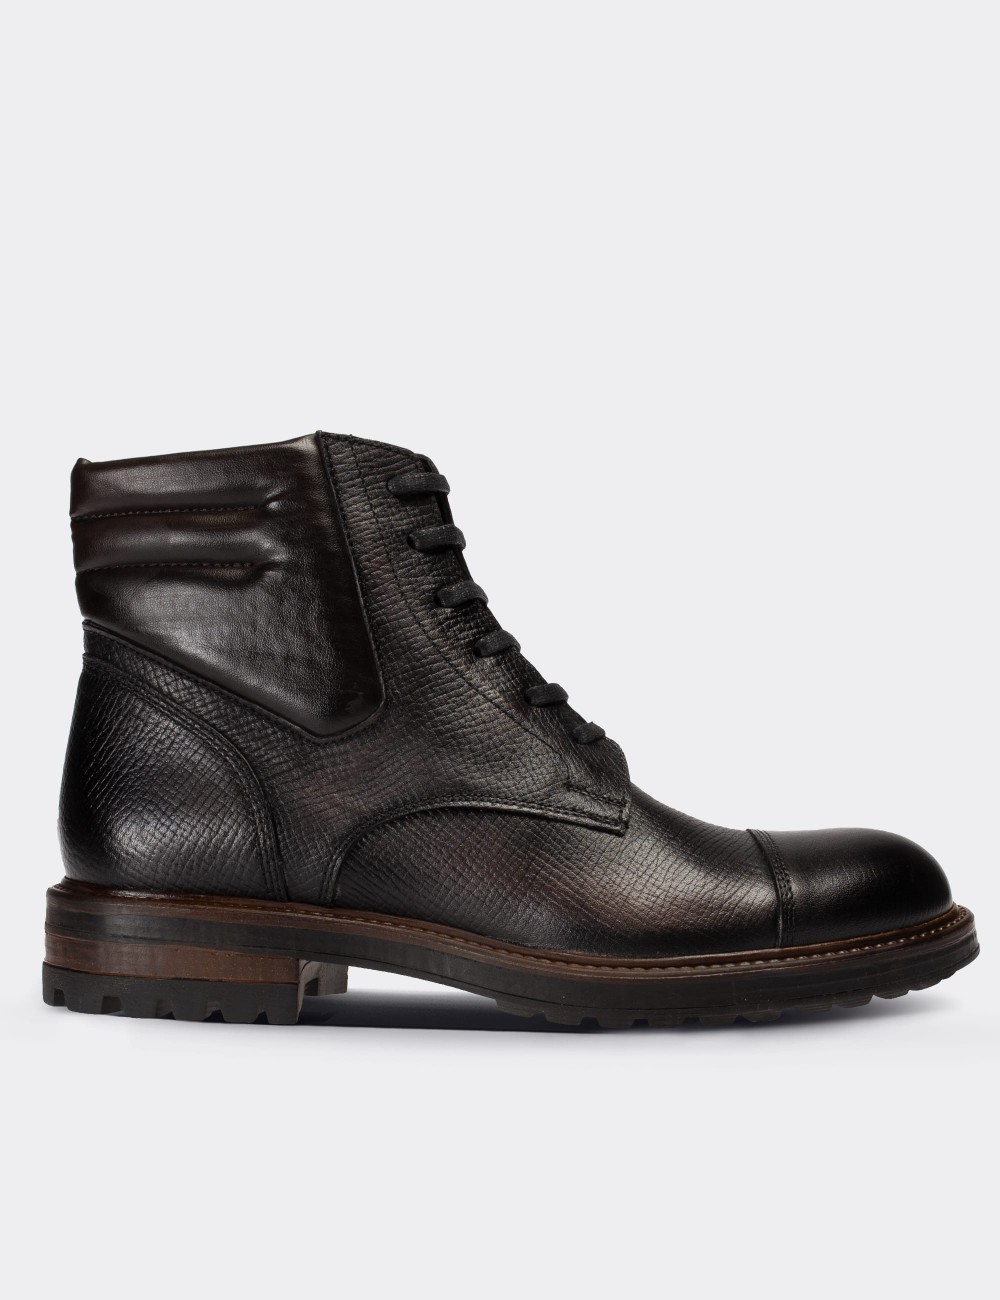 Anthracite  Leather Boots - 01752MANTC01